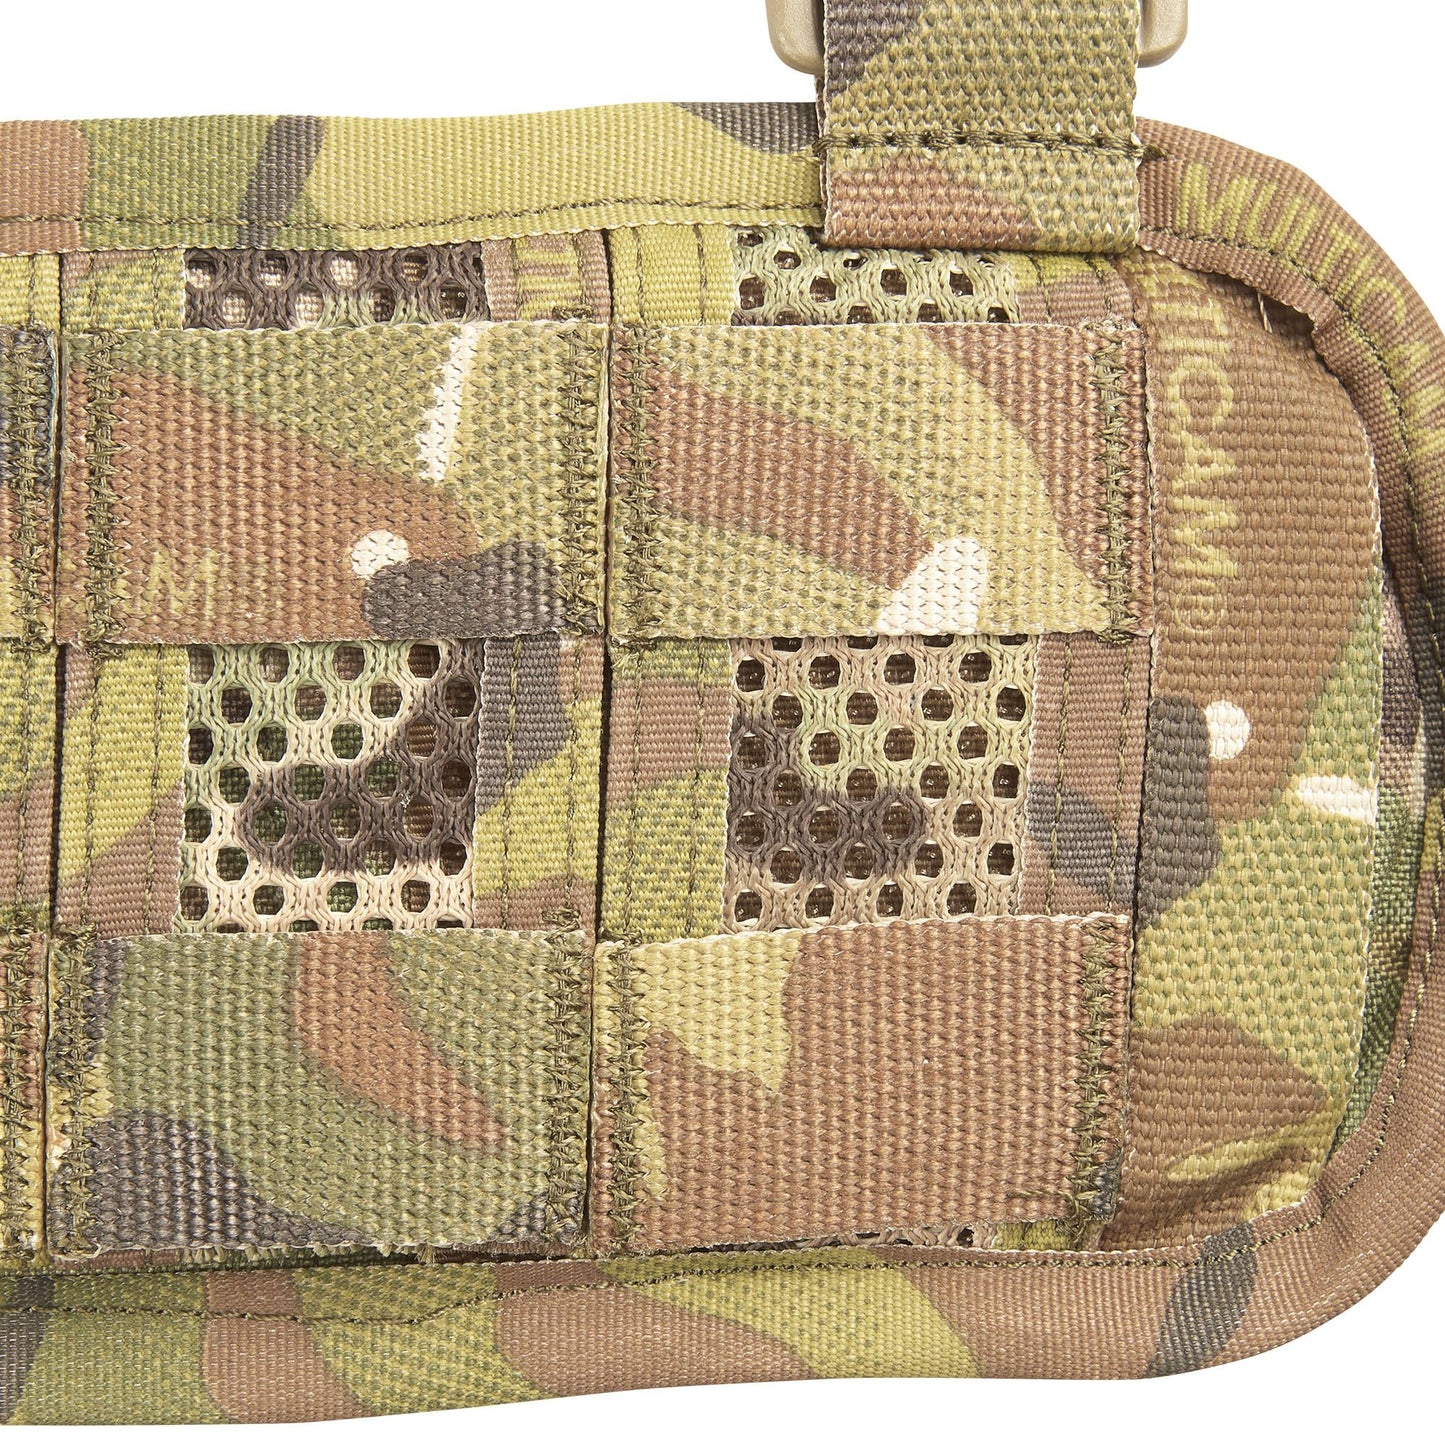 The Platatac 3S belt pad has been around for nearly 4 years, we have now released the MkII a lighter updated version based on the same low profile versatile design of the original 3S belt pad. www.defenceqstore.com.au